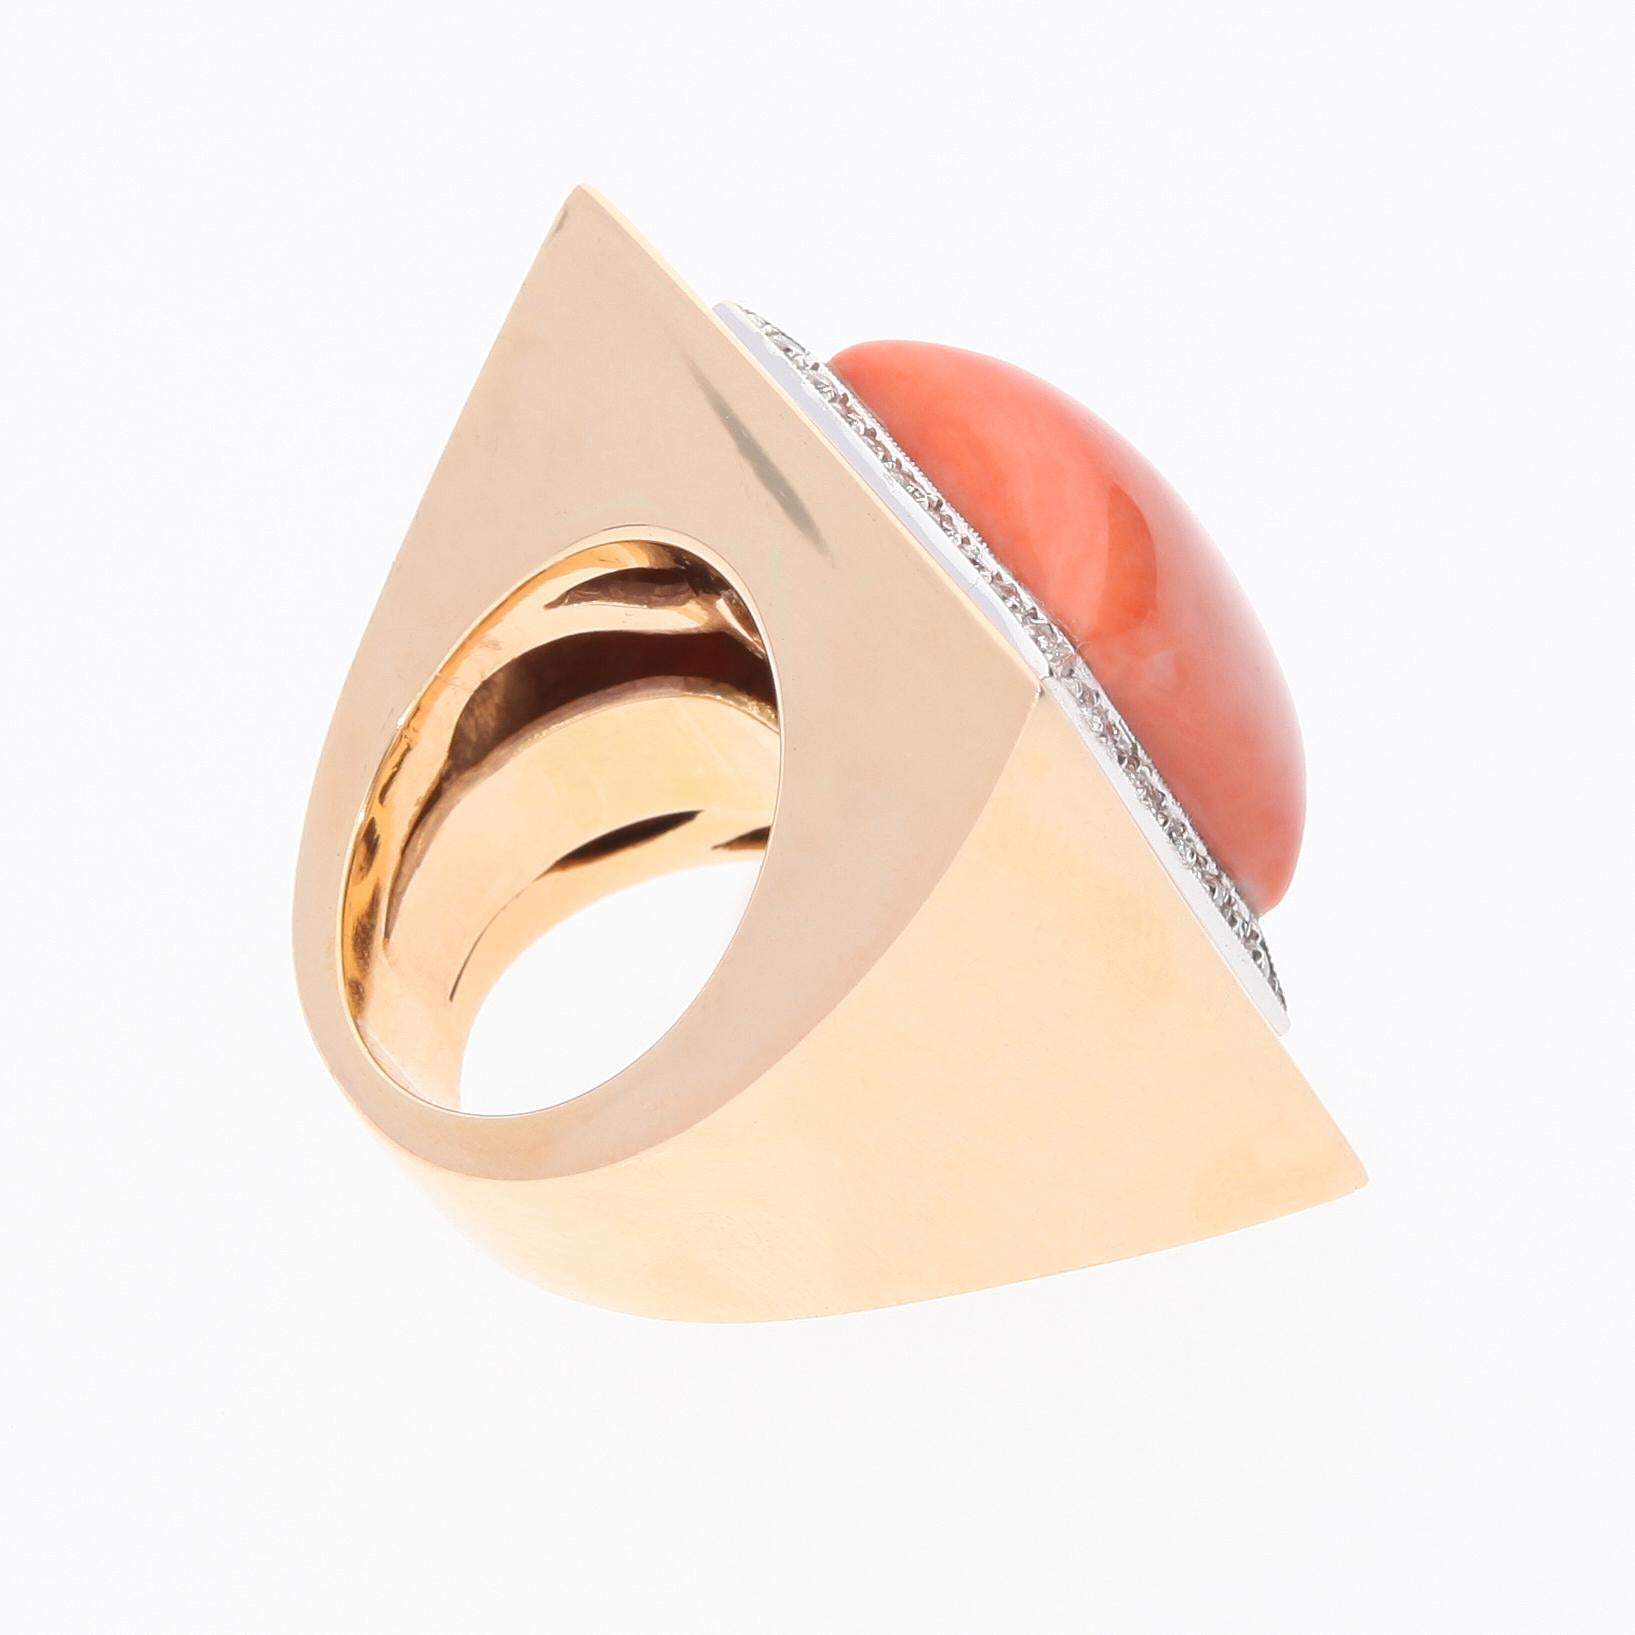 Cushion Cut Salmon Coral Ring Surrounded by 36 Diamonds. 18 Kt Rose Gold. Handmade in Italy. For Sale